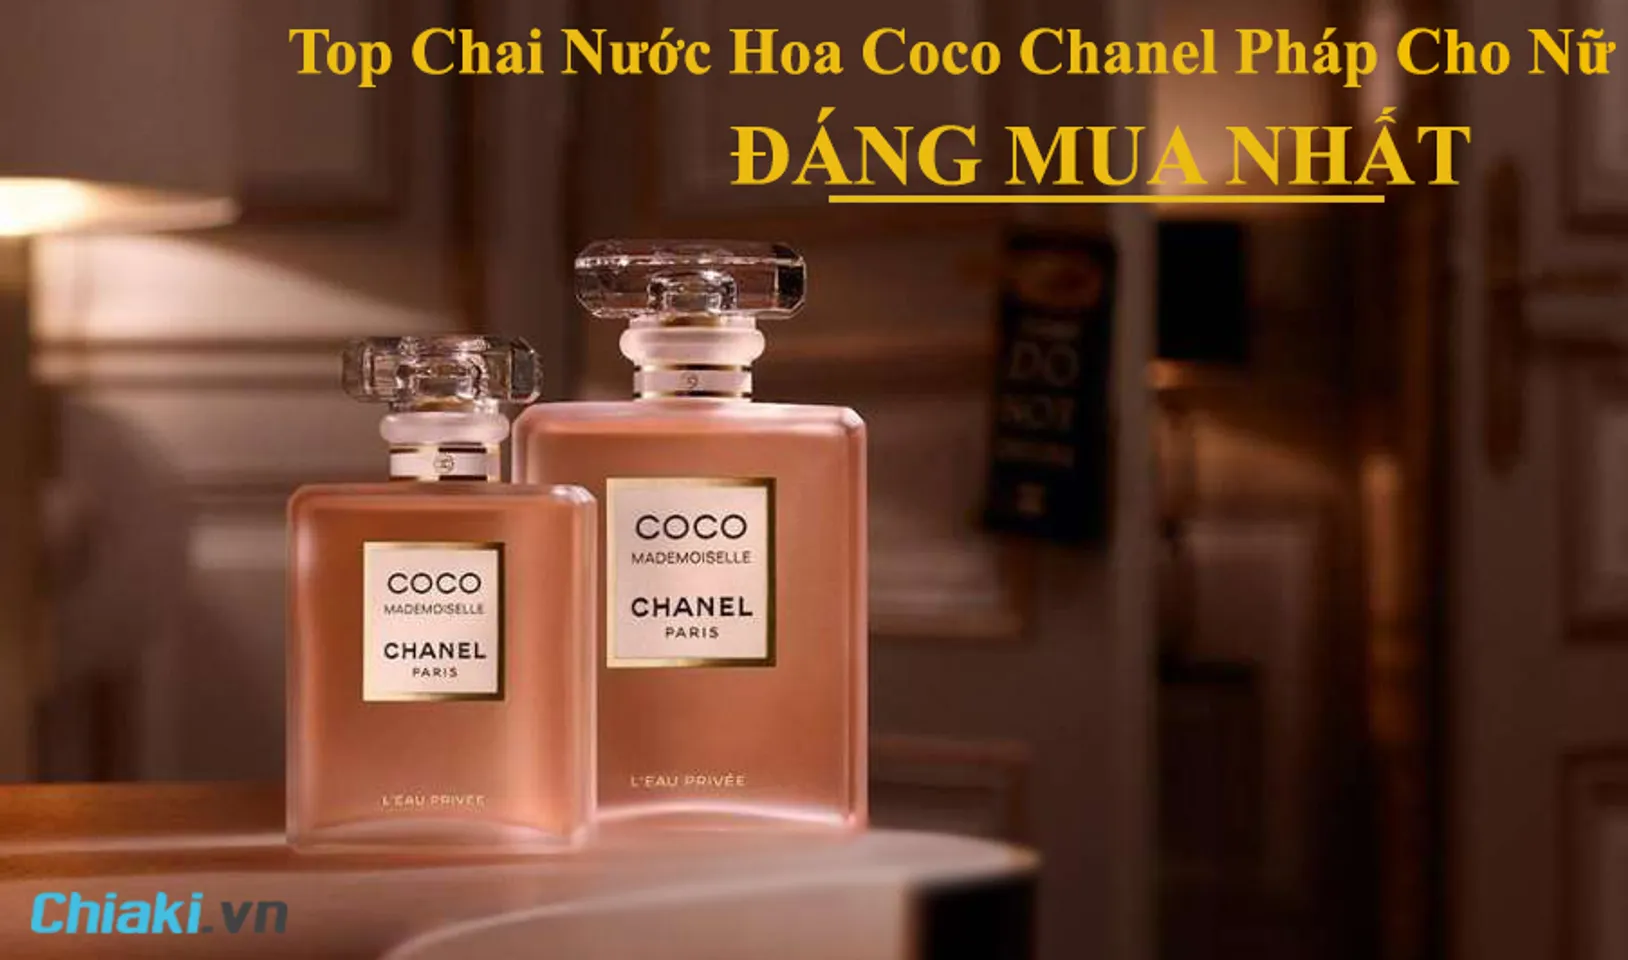 Portrait  Coco Chanel a woman both daring and free in NouvelleAquitaine